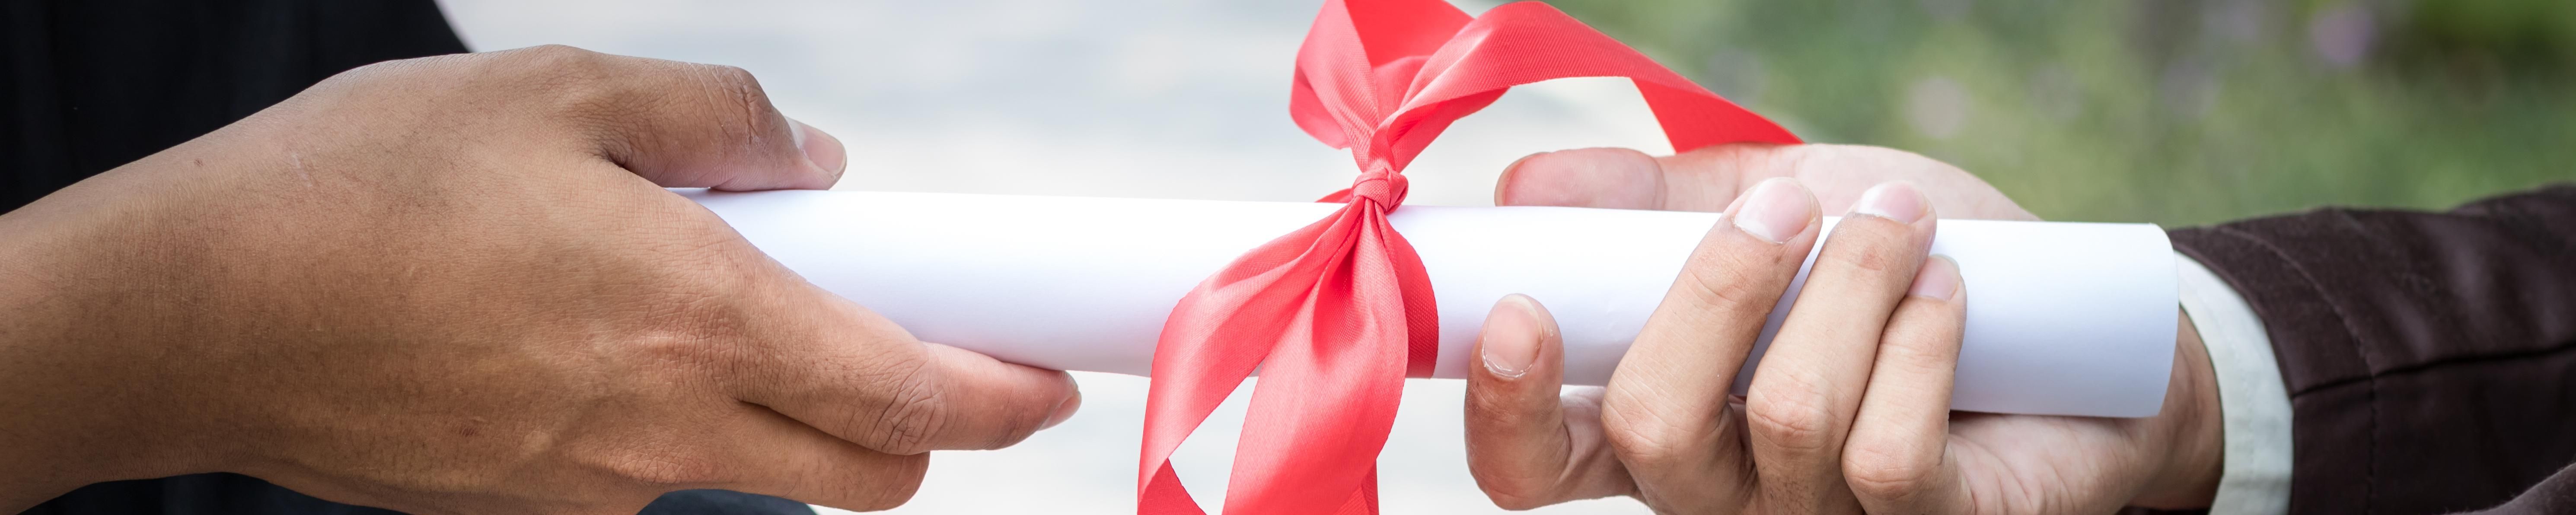 A photo of two hands holding either side of a diploma wrapped in a red bow.